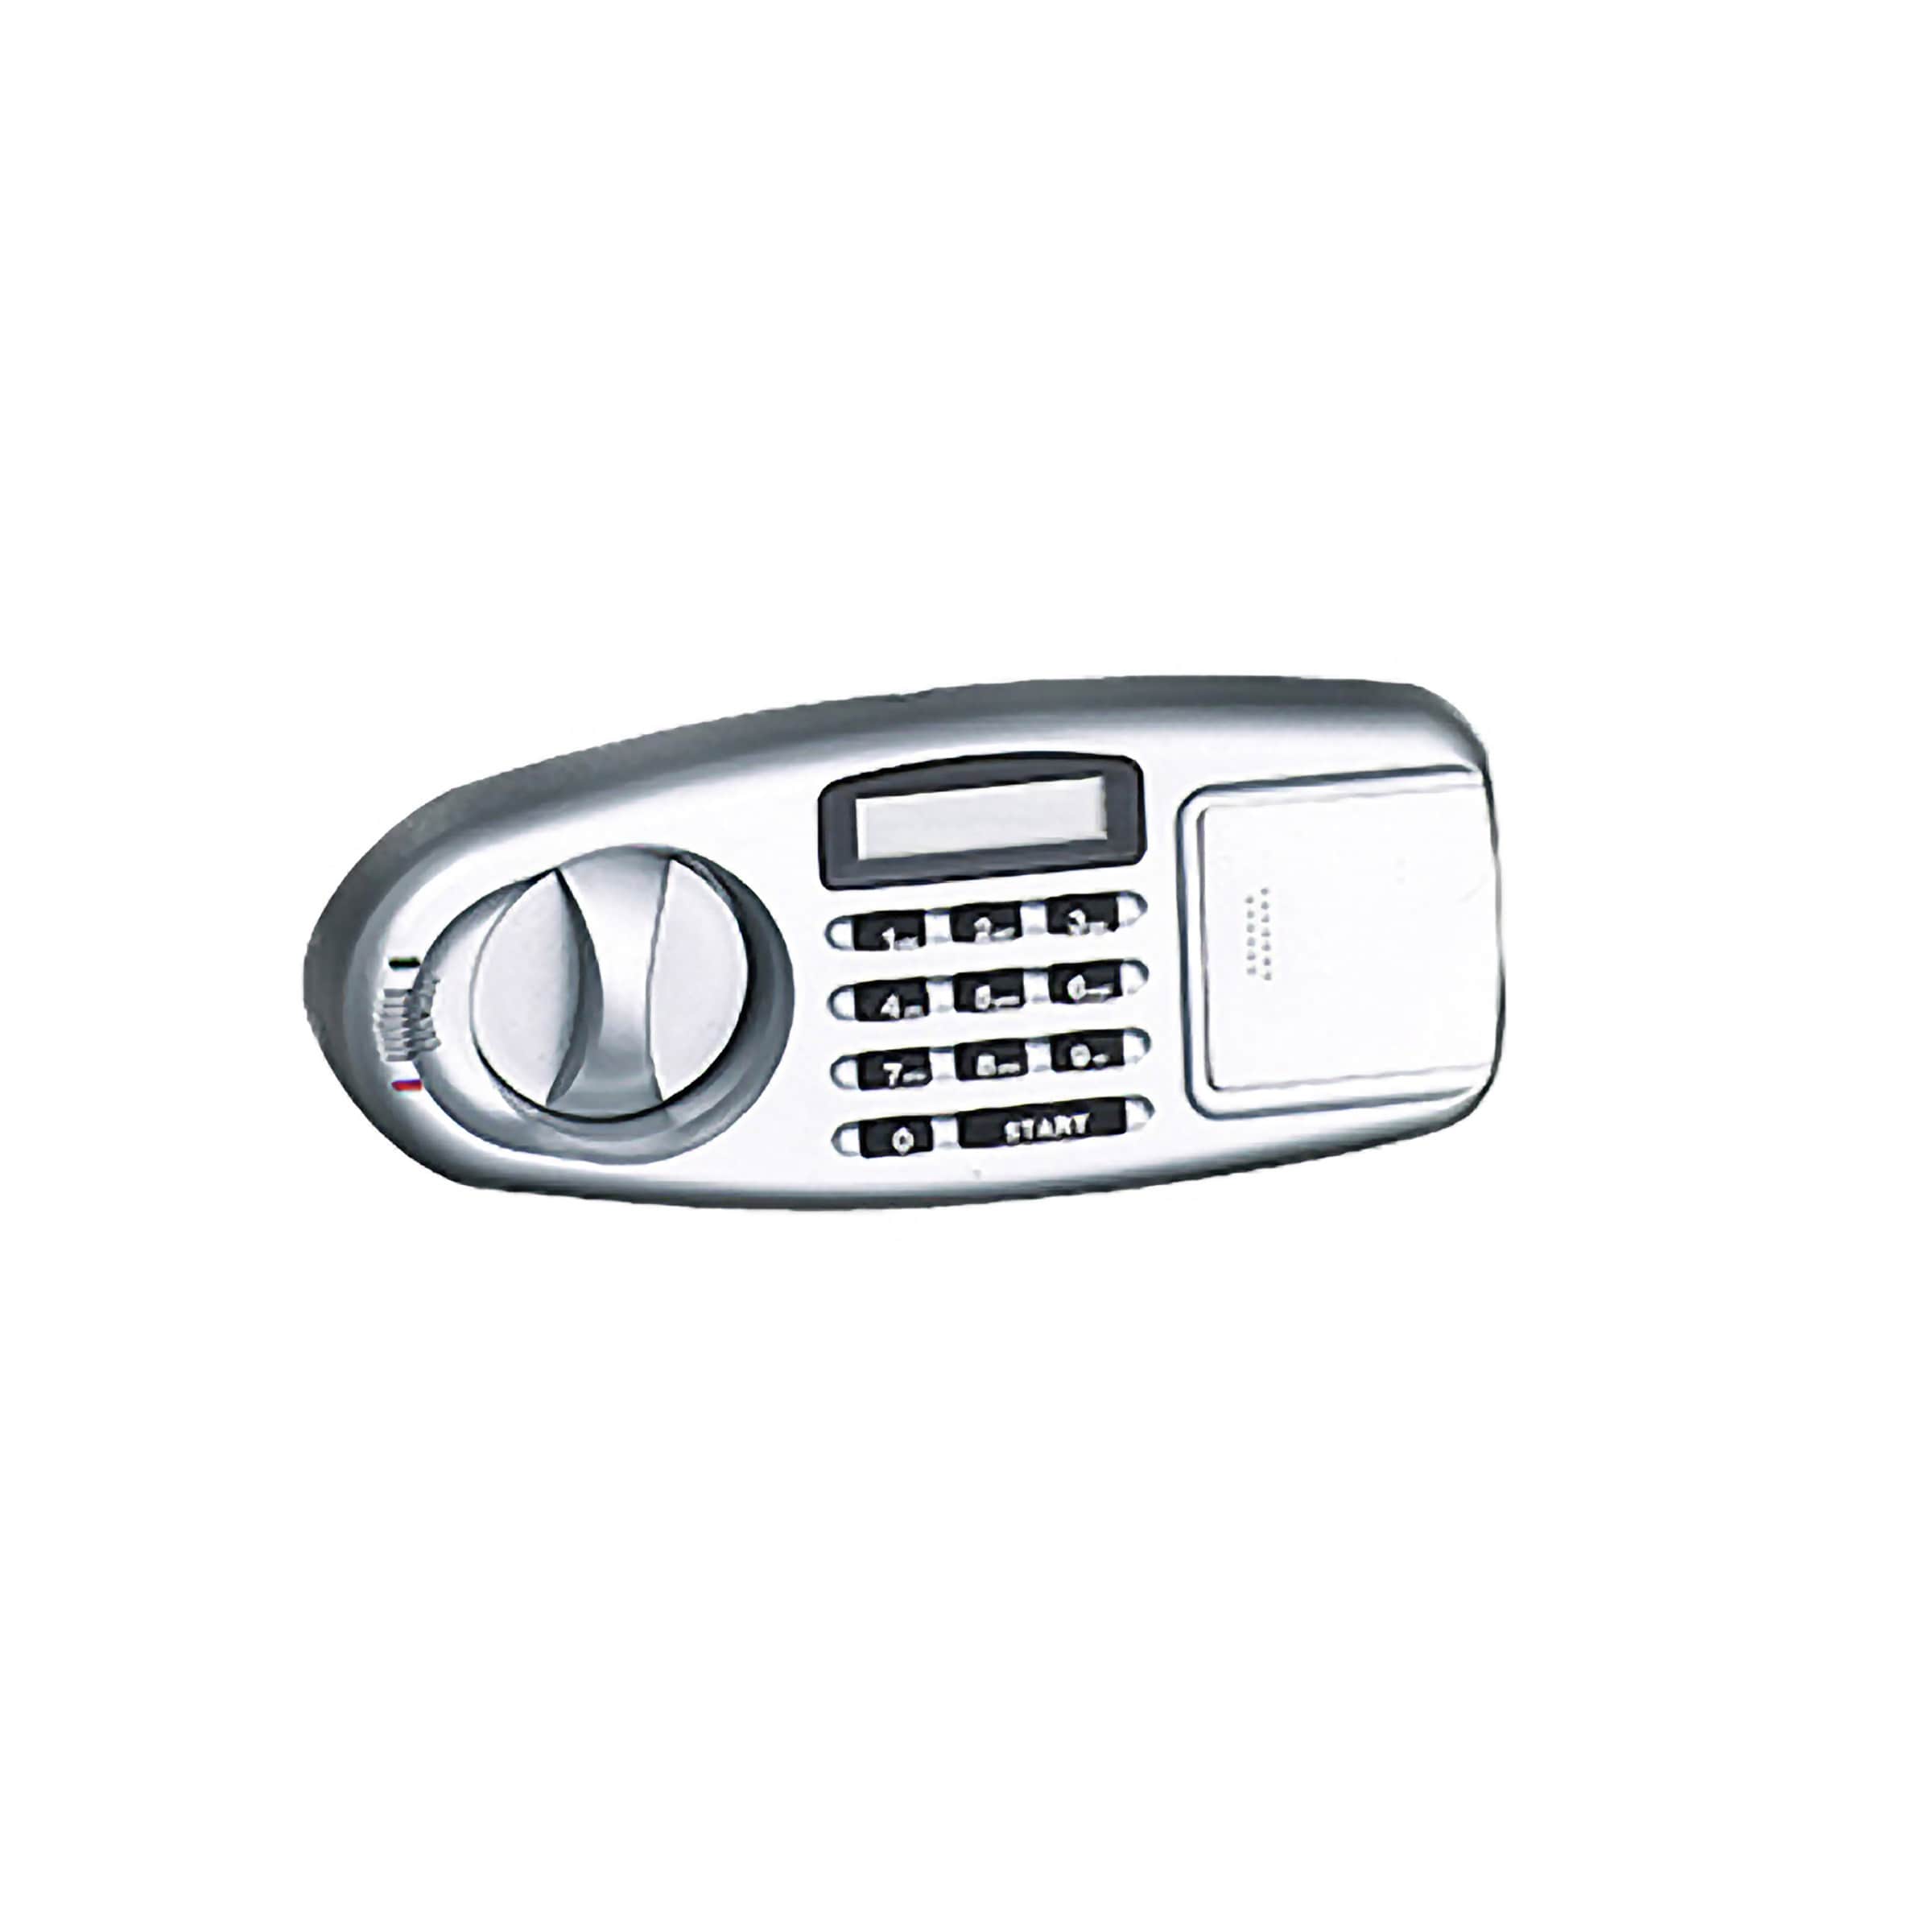 Electronic Flat Wall Safe Box with Digital Keypad and Manual Override Keys  Bed Bath  Beyond 37357627